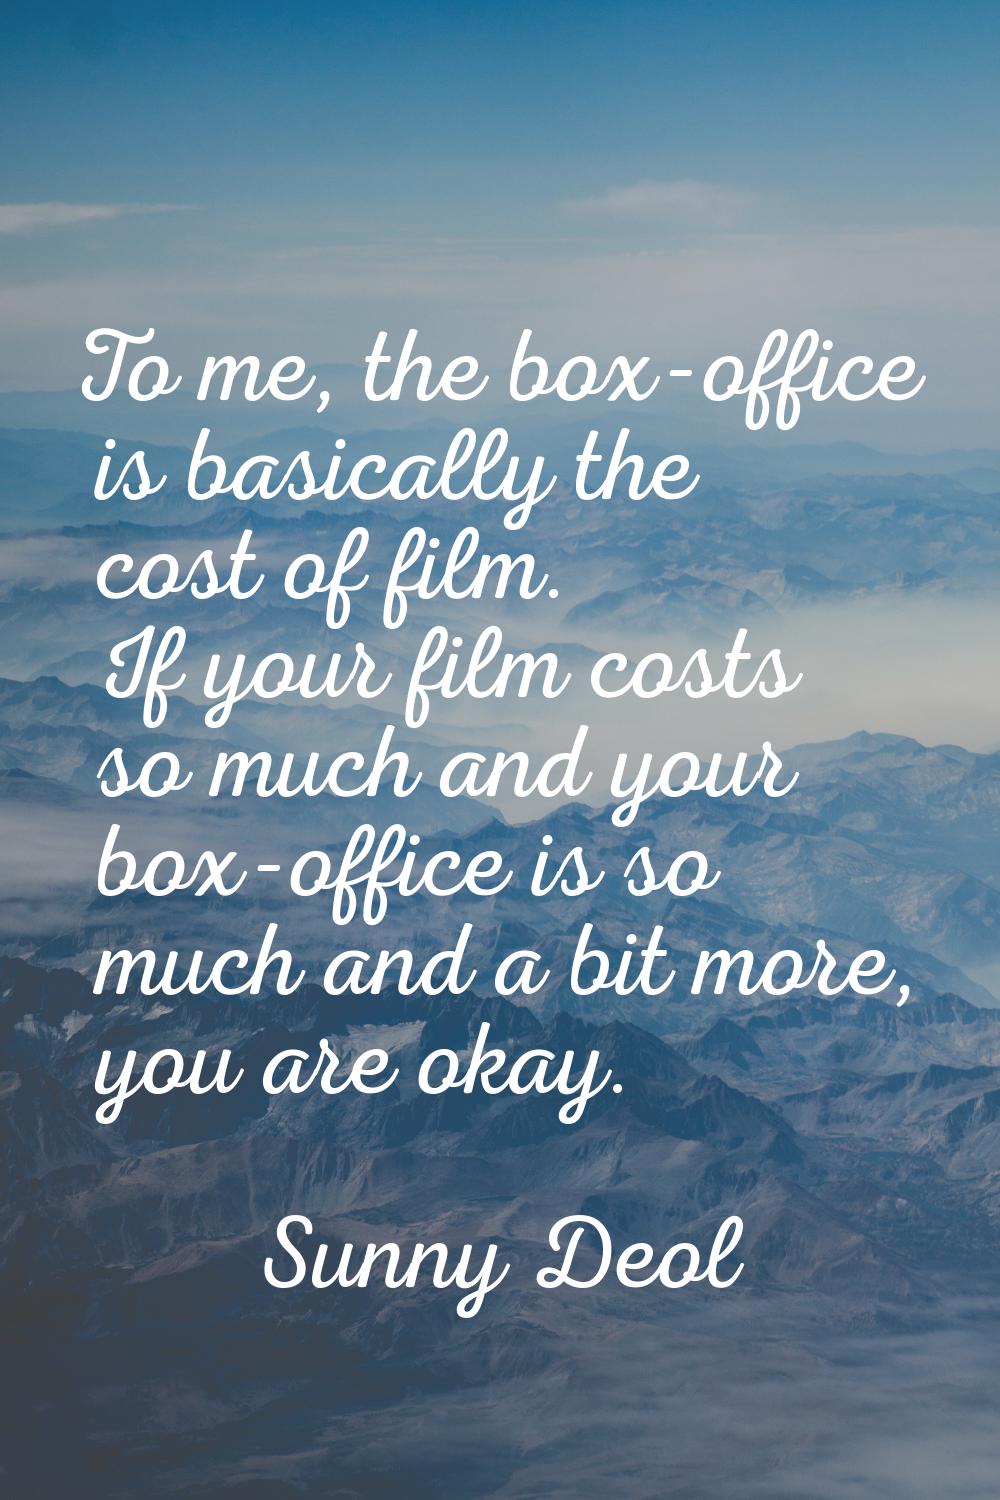 To me, the box-office is basically the cost of film. If your film costs so much and your box-office